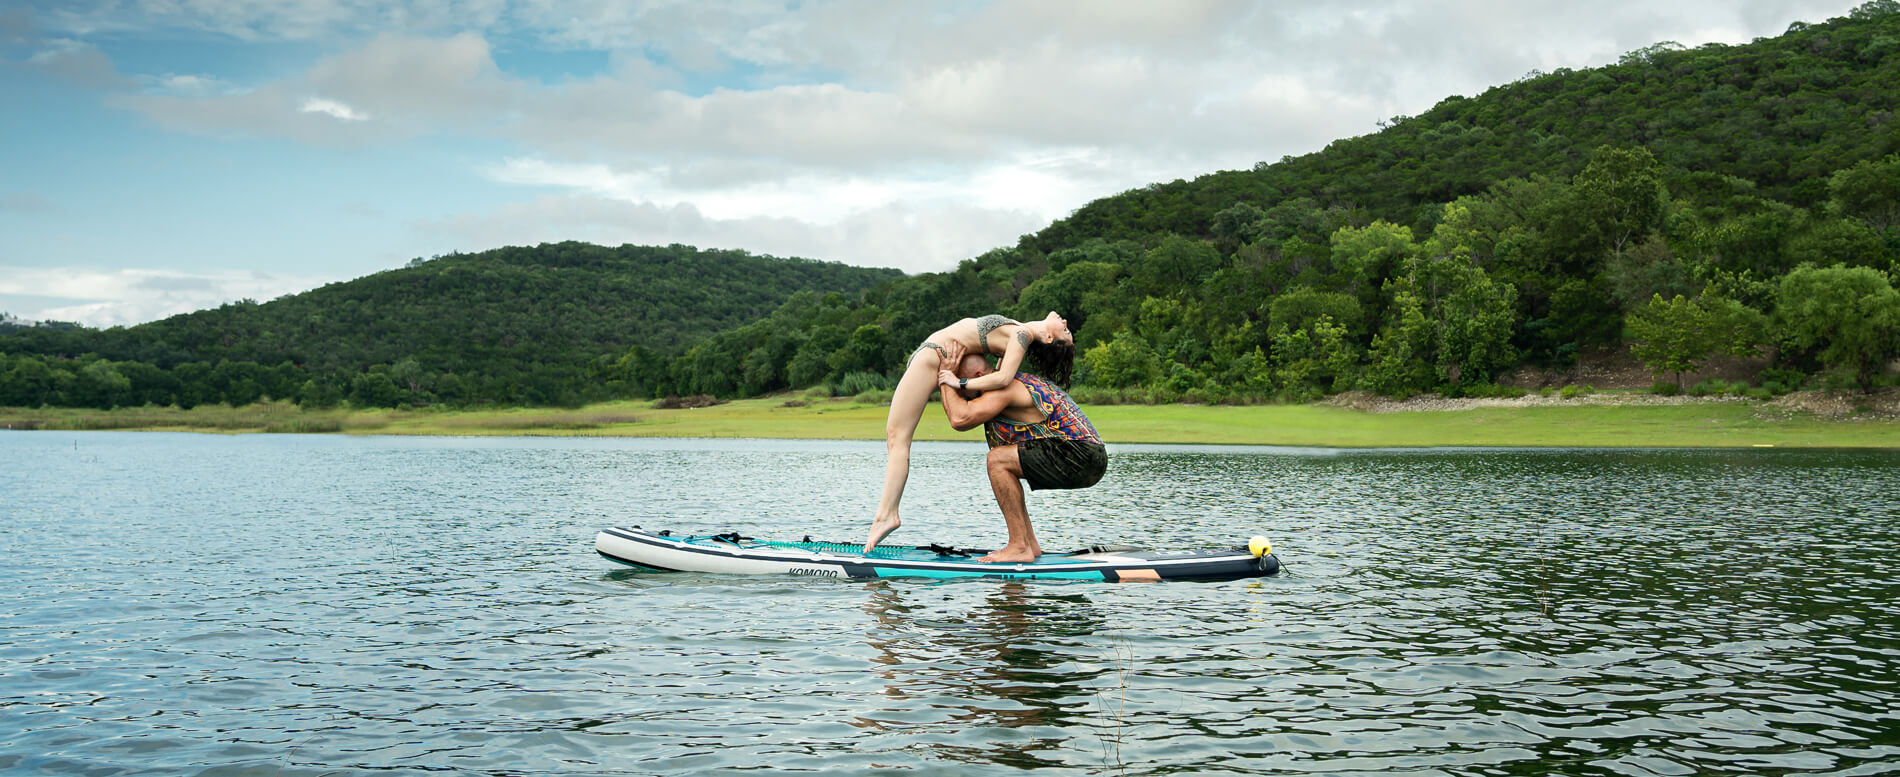 Paddle Boarding: Six exercises to prep you for the paddleboard